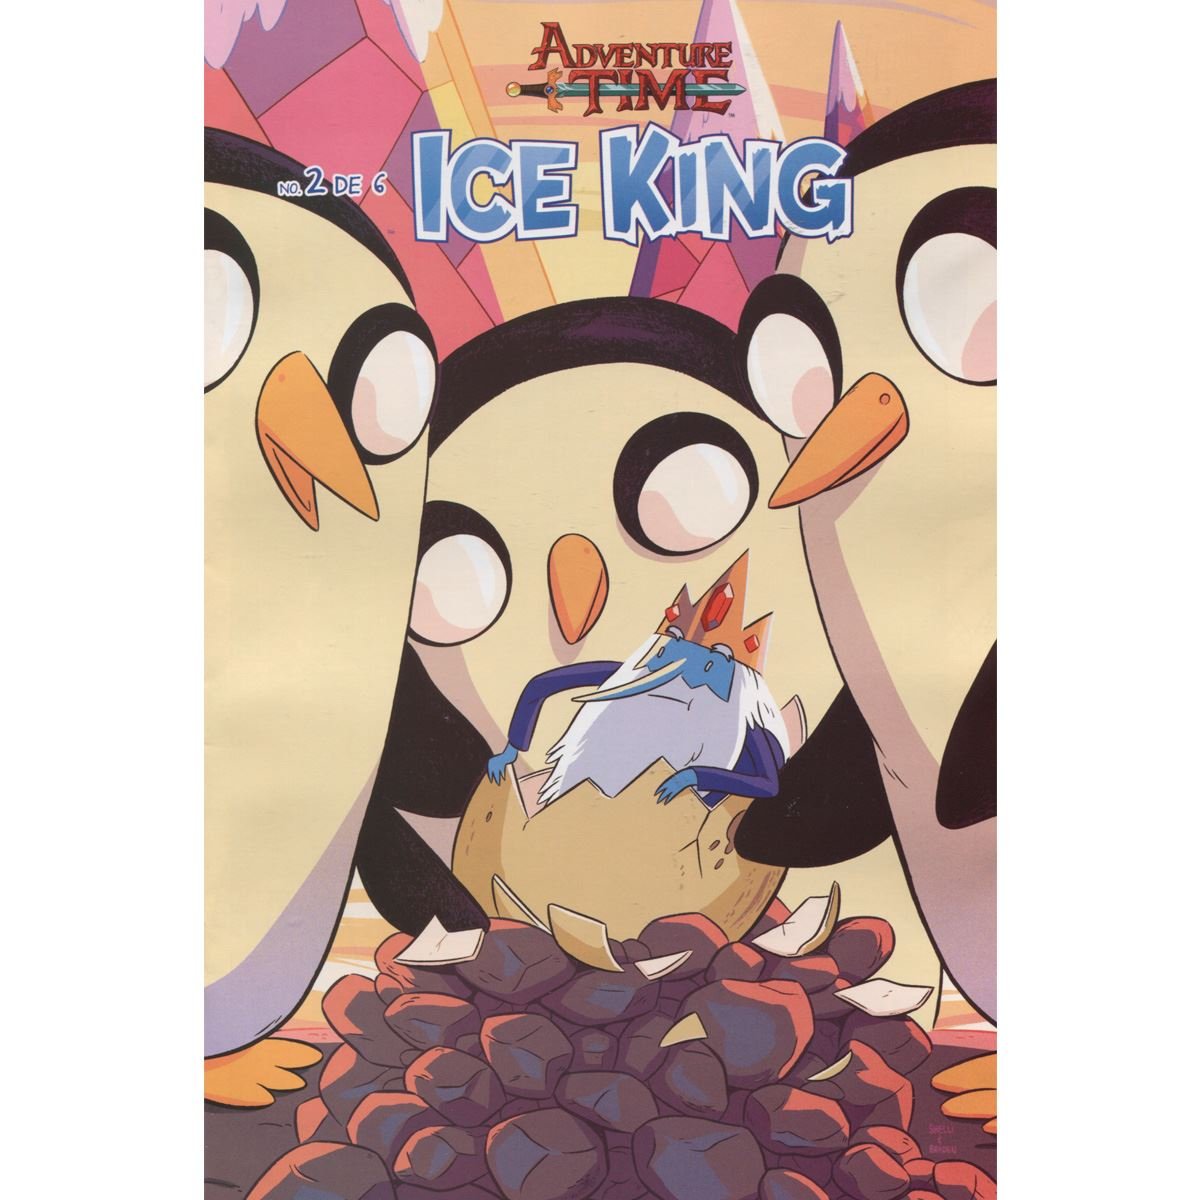 Comic adventure time ice king 2A